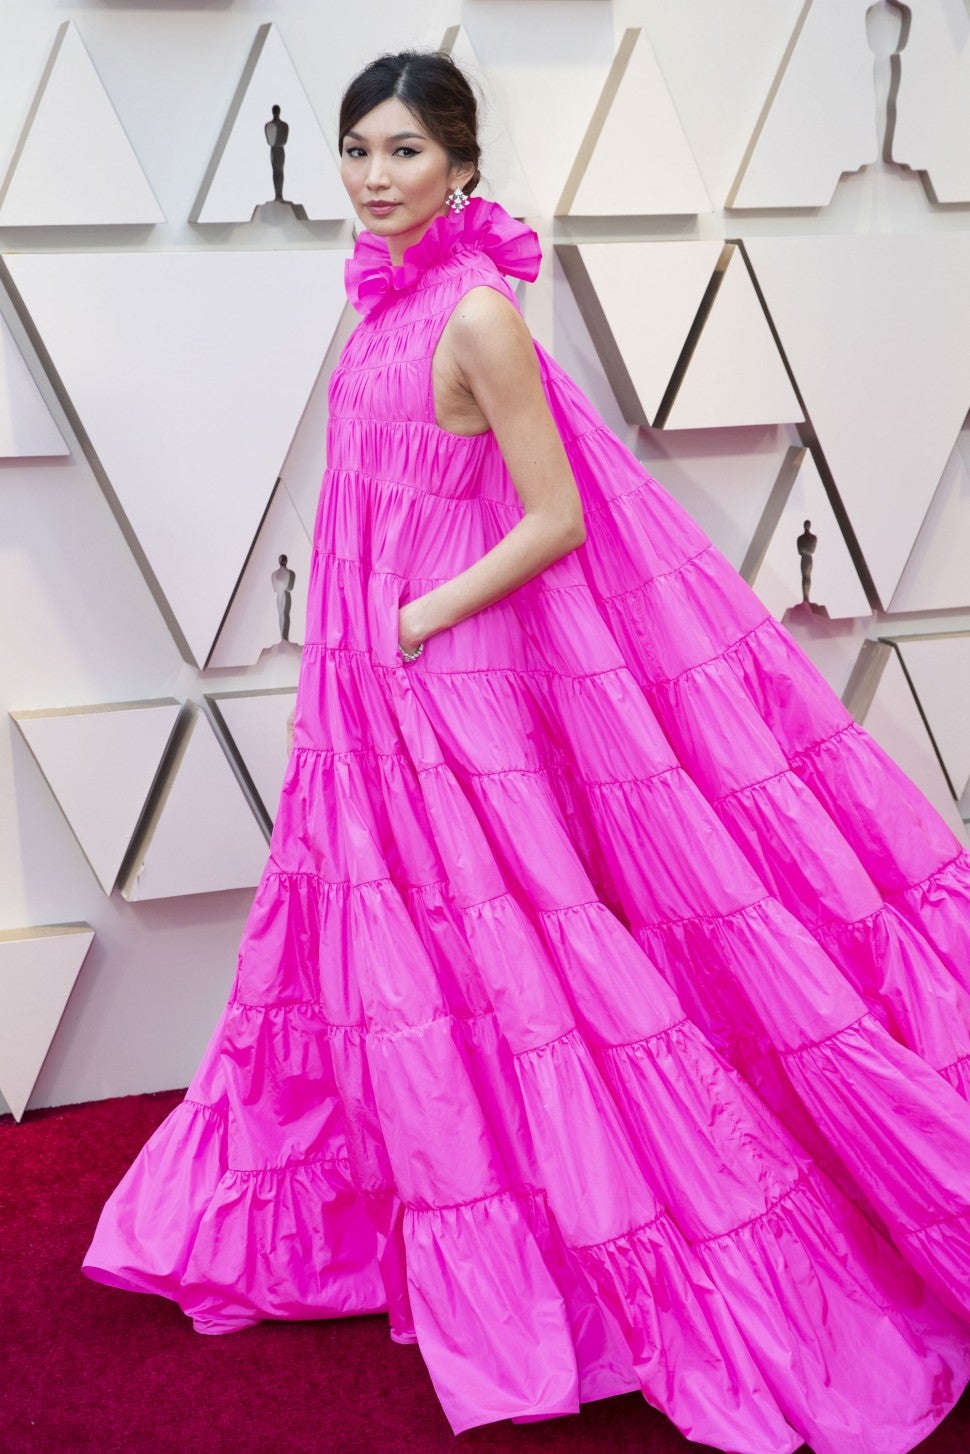 Gemma Chan Heats Up 2019 Oscars Red Carpet in Dramatic Hot Pink Gown ...